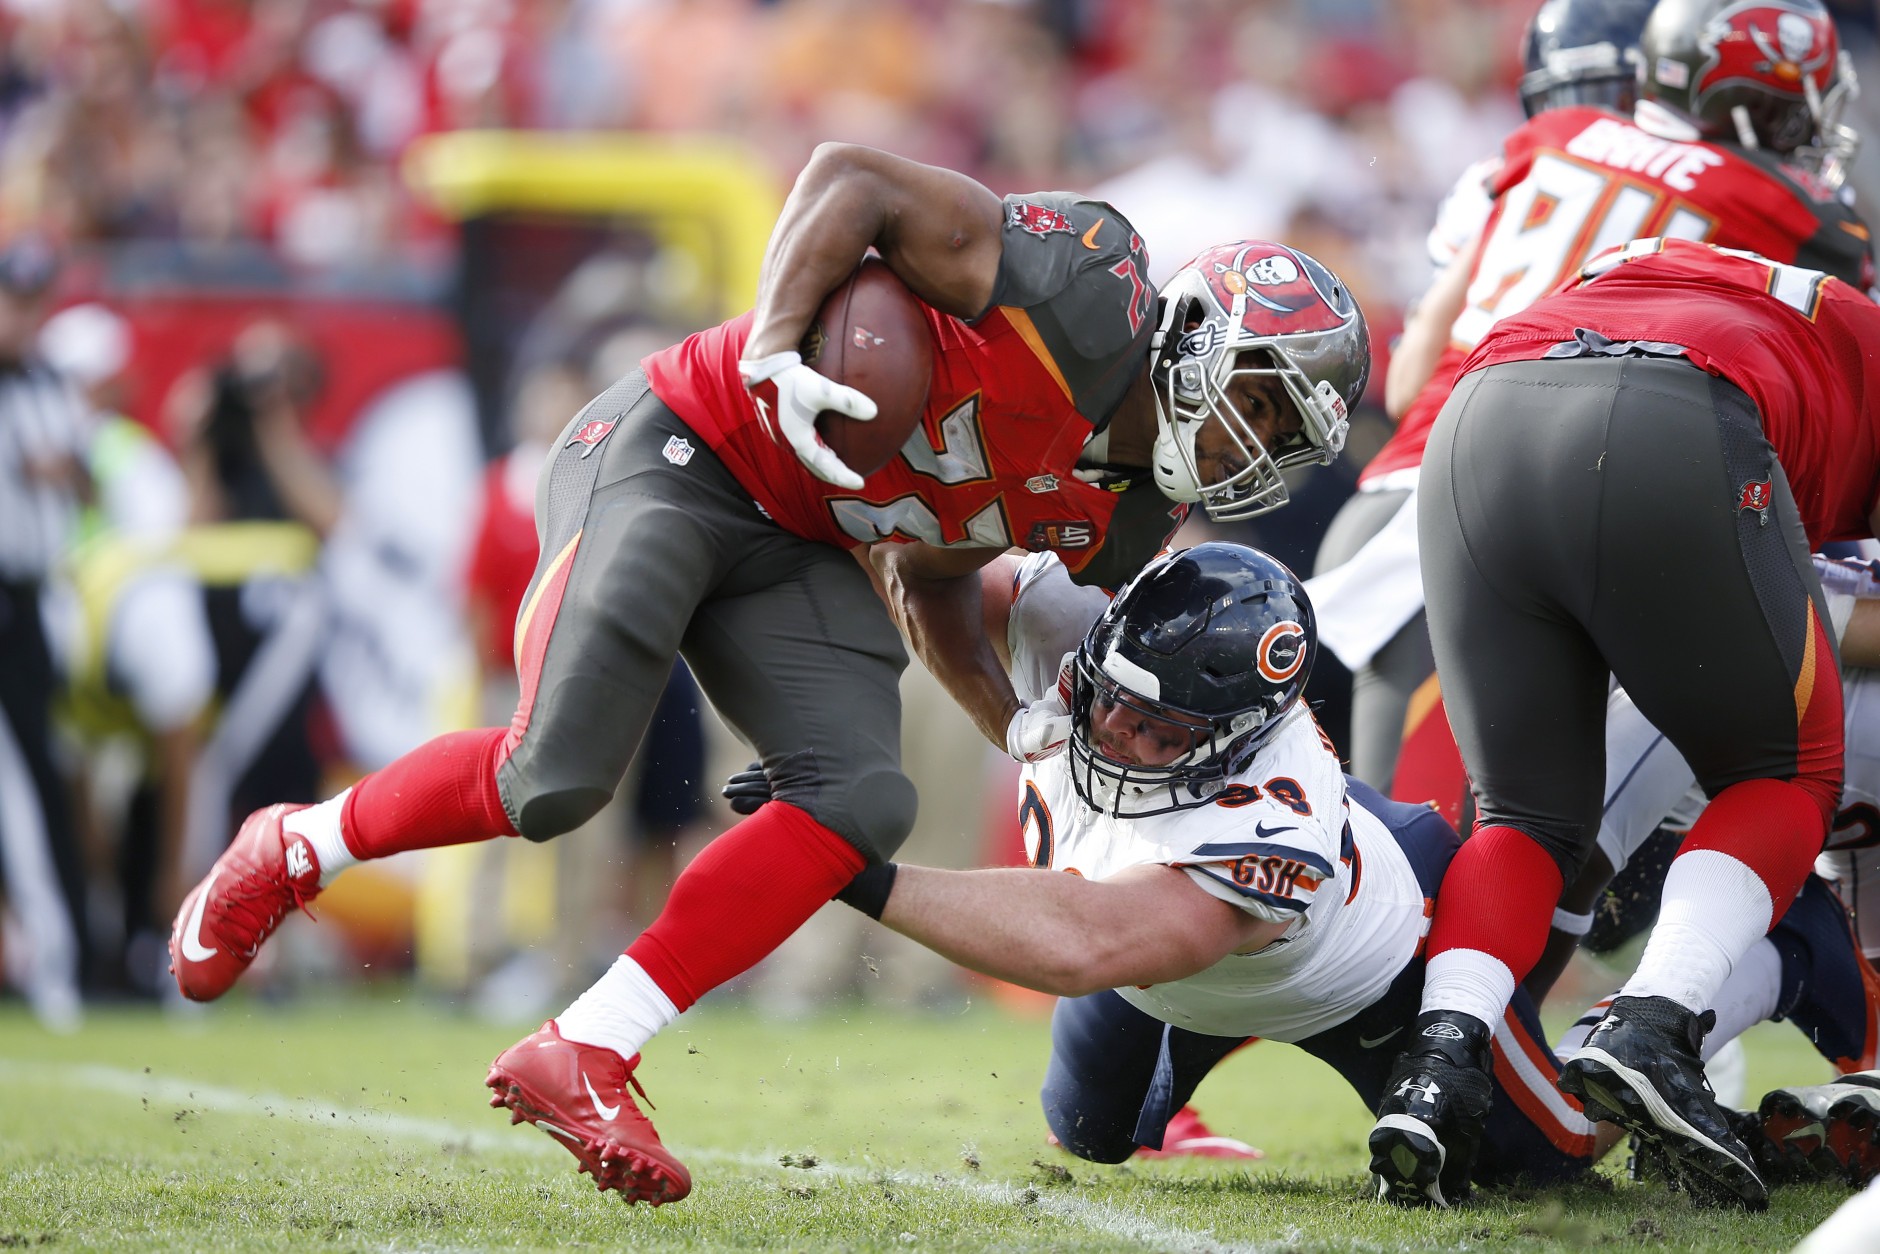 TAMPA, FL - DECEMBER 27: Mitch Unrein #98 of the Chicago Bears makes a tackle for a loss against Doug Martin #22 of the Tampa Bay Buccaneers in the second half of the game at Raymond James Stadium on December 27, 2015 in Tampa, Florida. The Bears defeated the Buccaneers 26-21. (Photo by Joe Robbins/Getty Images)